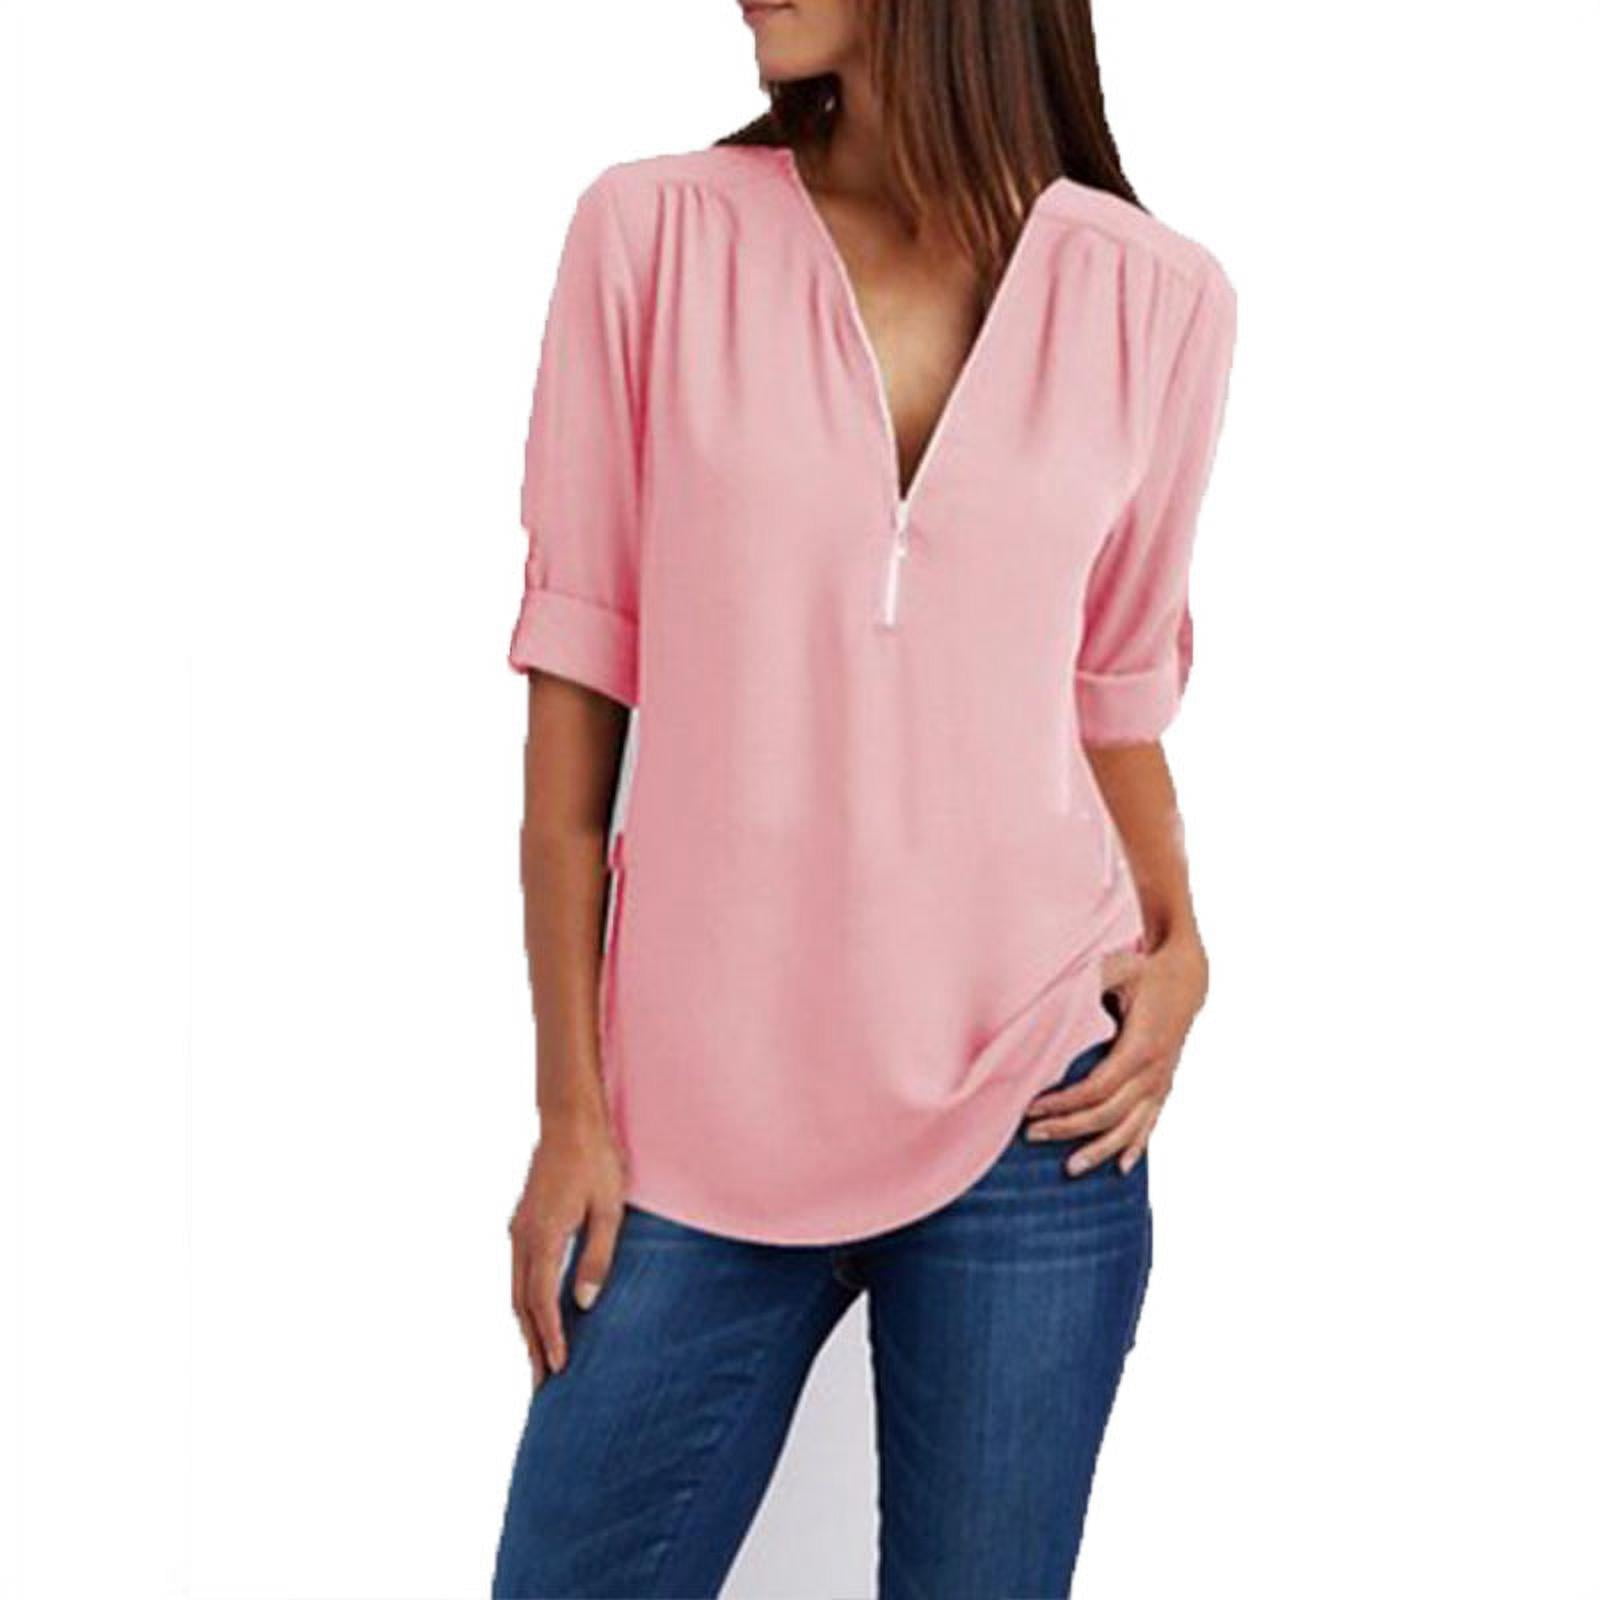 Fashion Women Casual Tops T Shirt Loose Top Long Sleeve Solid Blouse ...